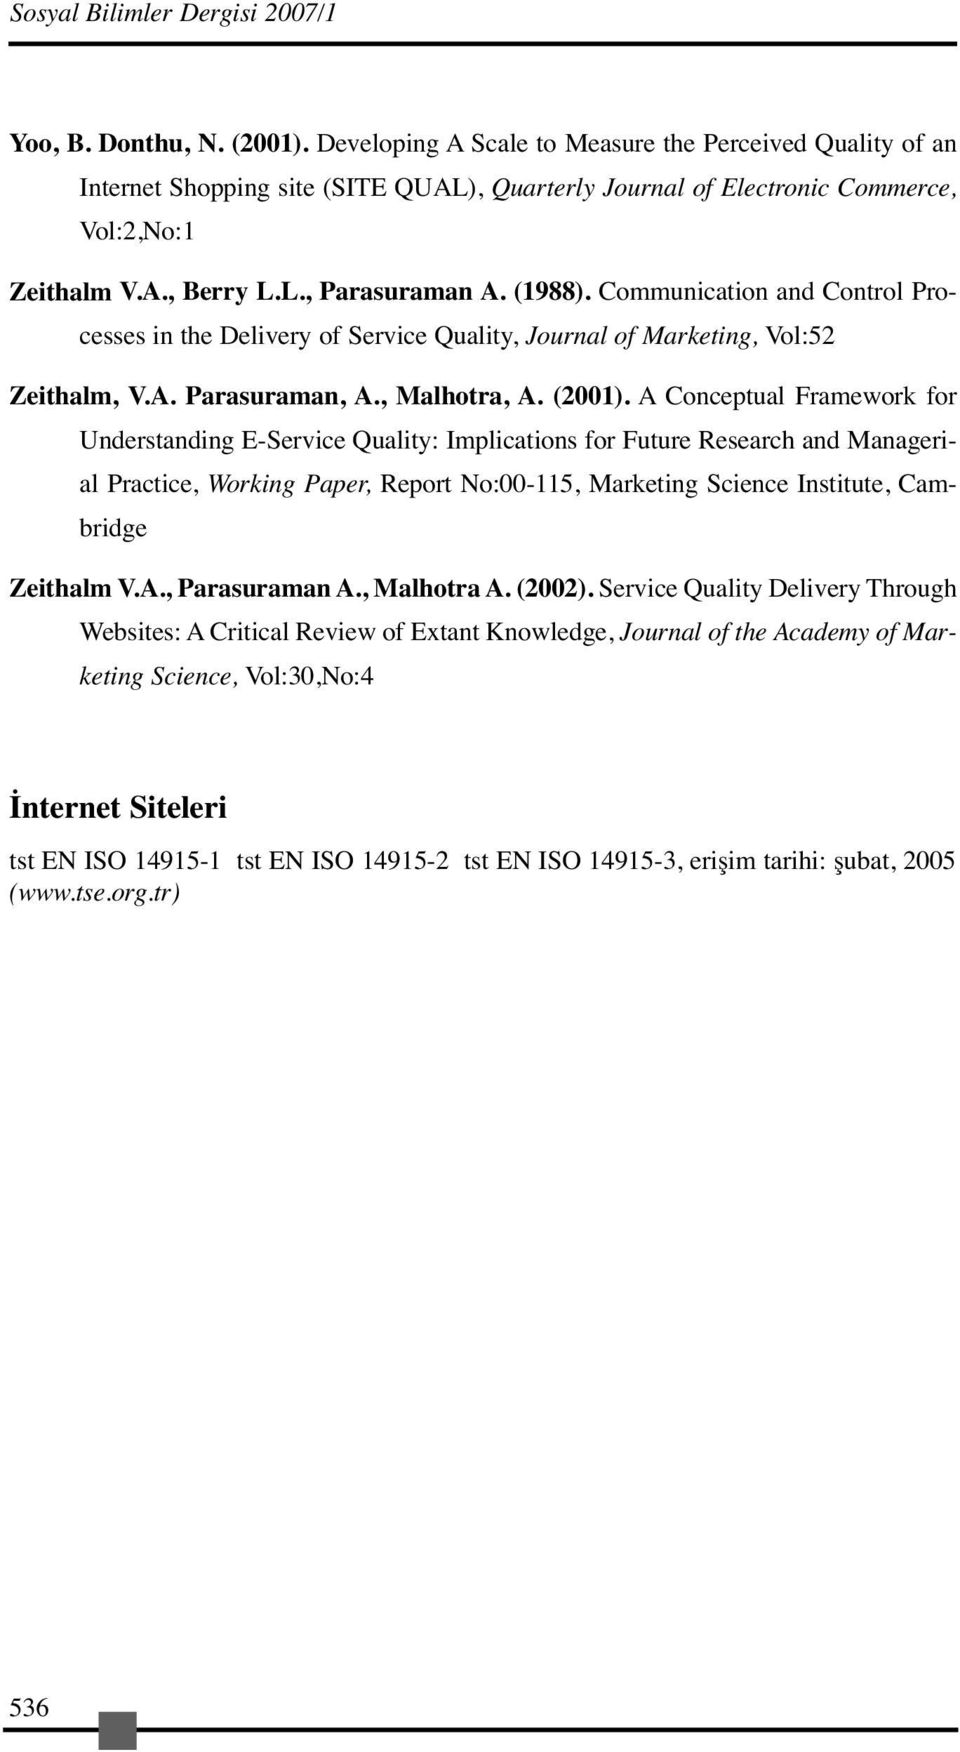 Communication and Control Processes in the Delivery of Service Quality, Journal of Marketing, Vol:52 Zeithalm, V.A. Parasuraman, A., Malhotra, A. (2001).